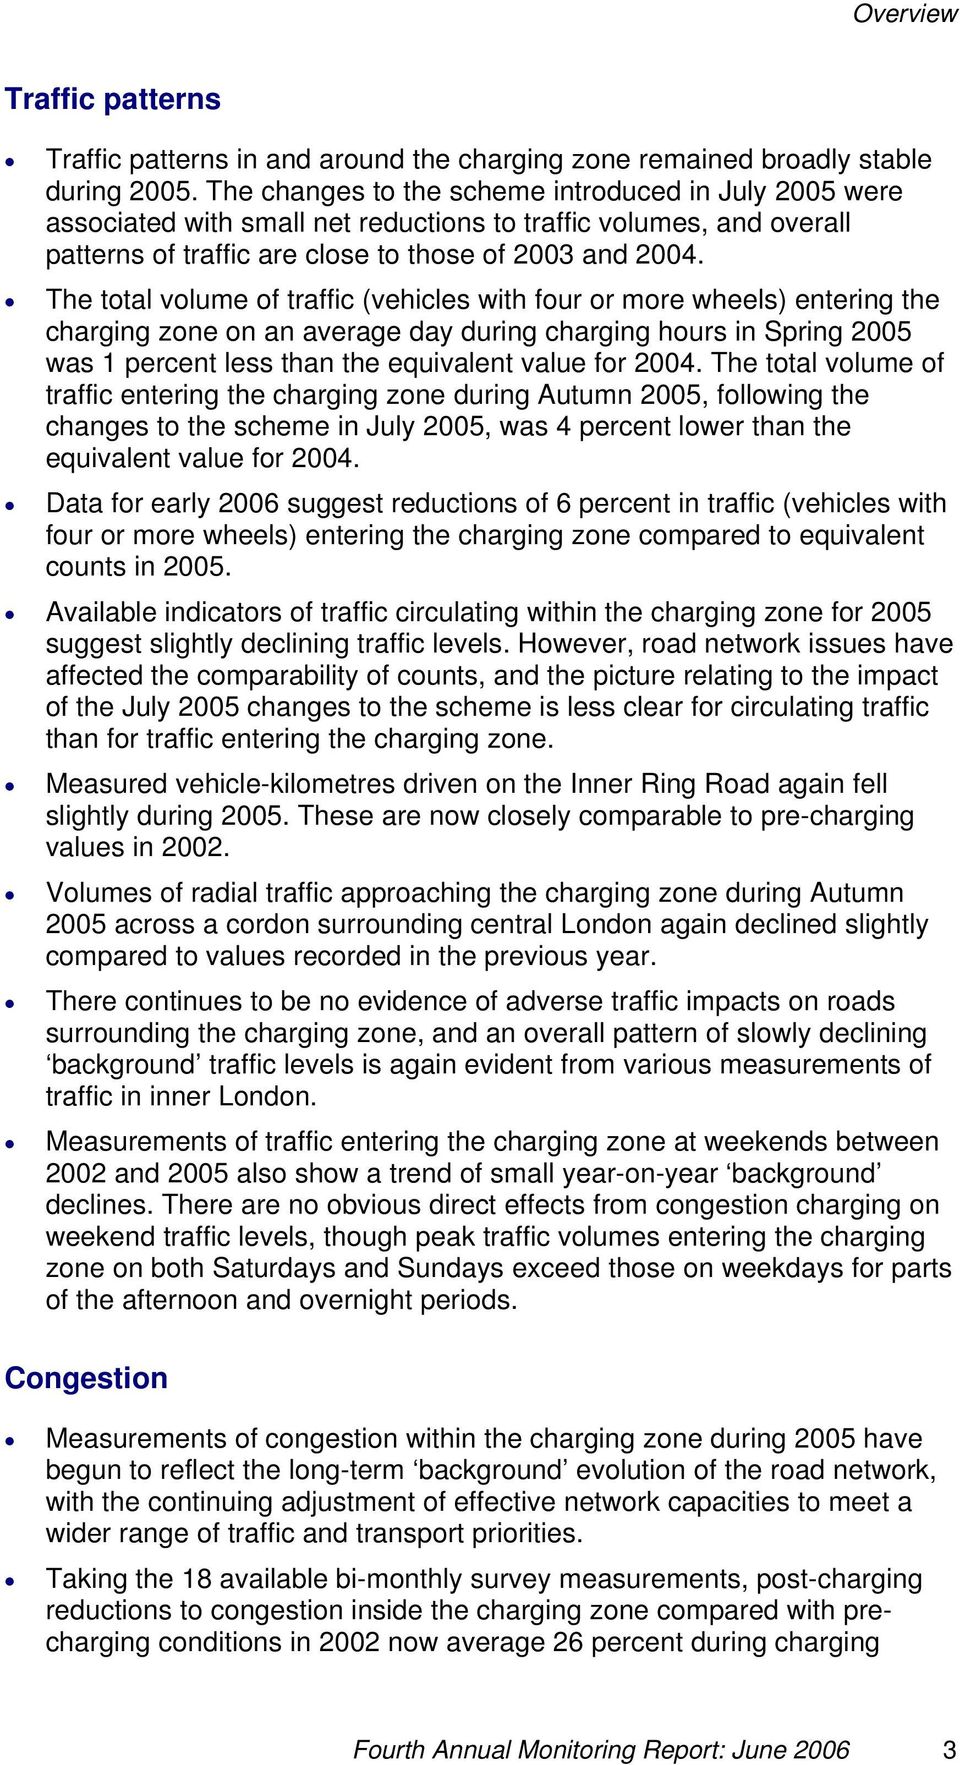 The total volume of traffic (vehicles with four or more wheels) entering the charging zone on an average day during charging hours in Spring 2005 was 1 percent less than the equivalent value for 2004.